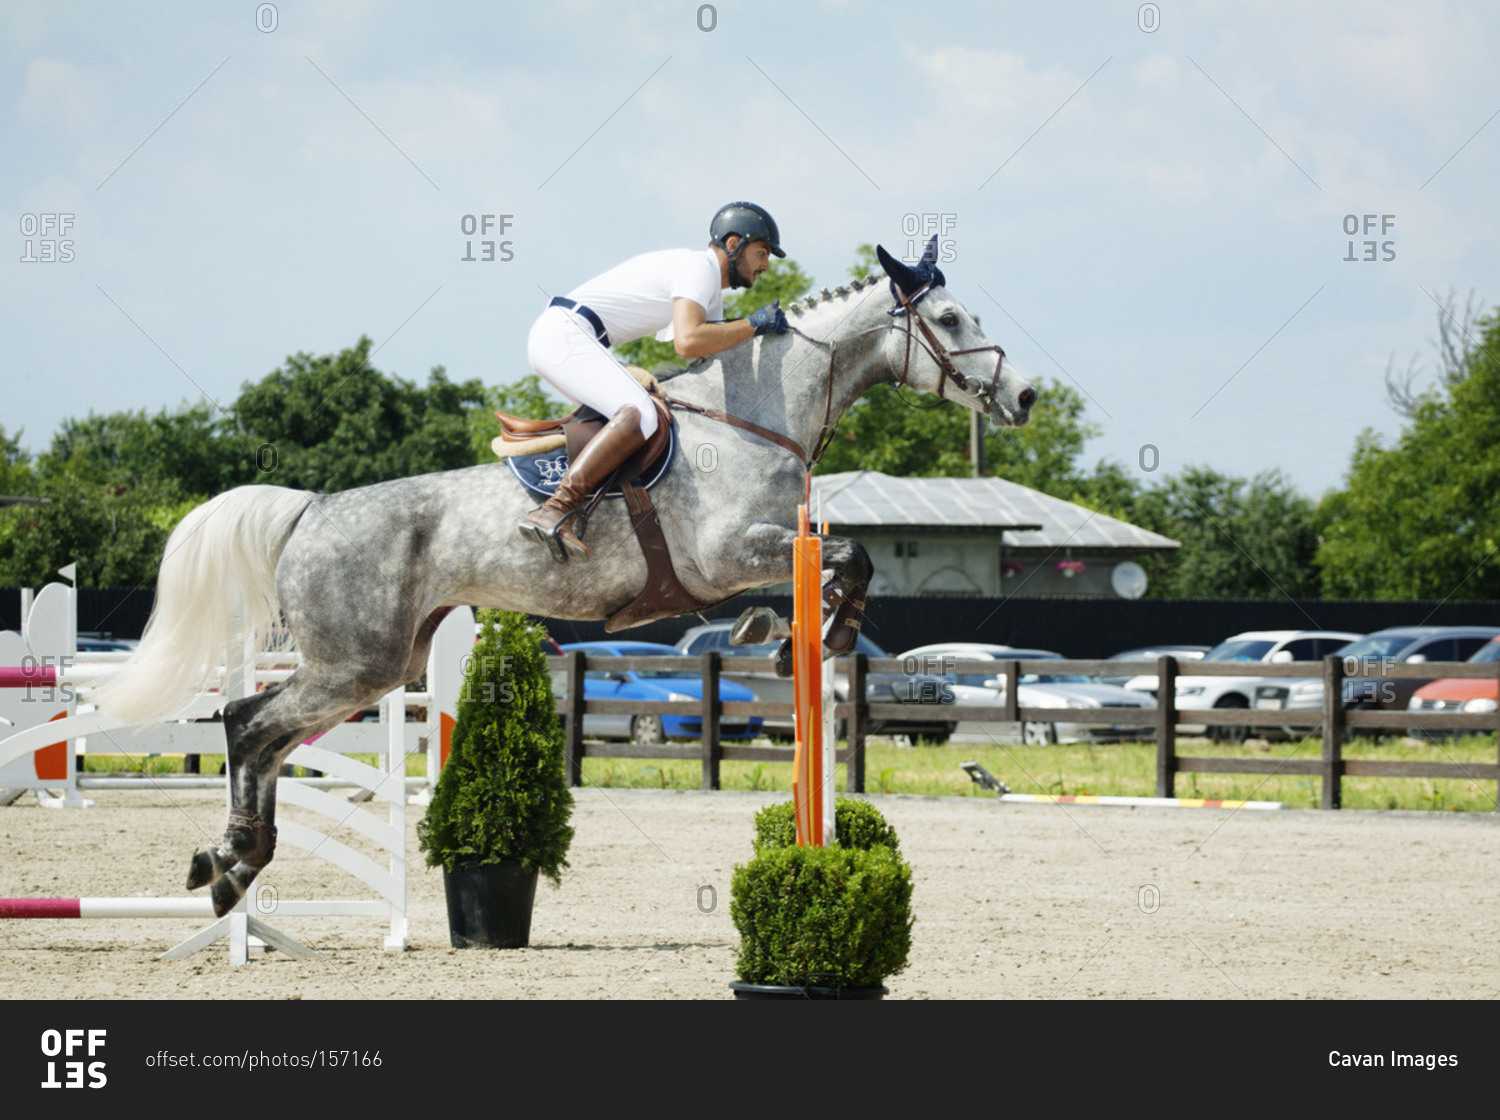 Man on horse jumping during competition